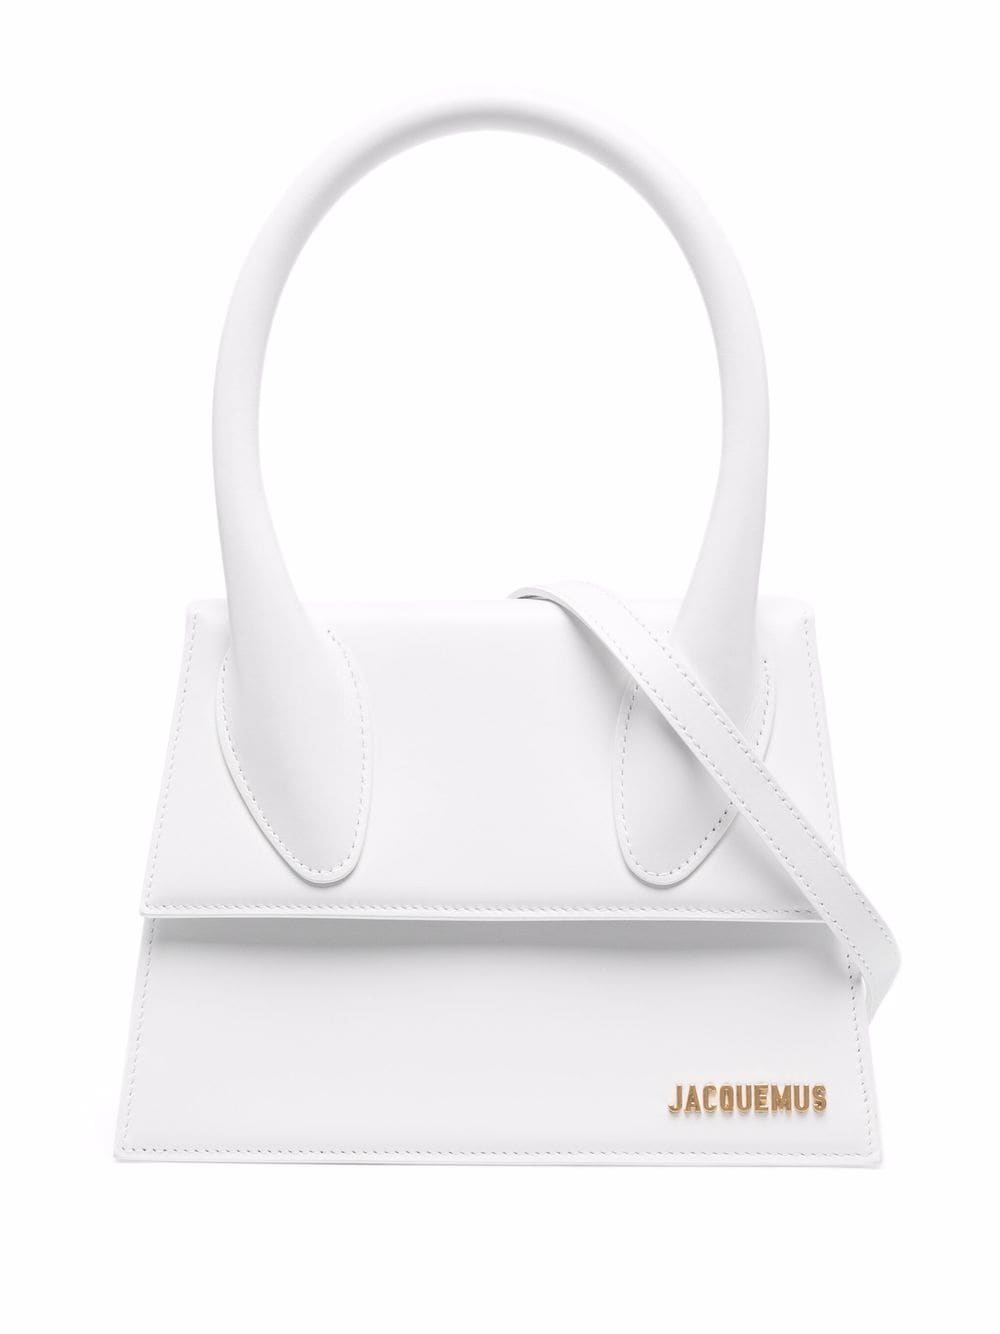 JACQUEMUS White Leather Tote Handbag with Gold-Tone Details